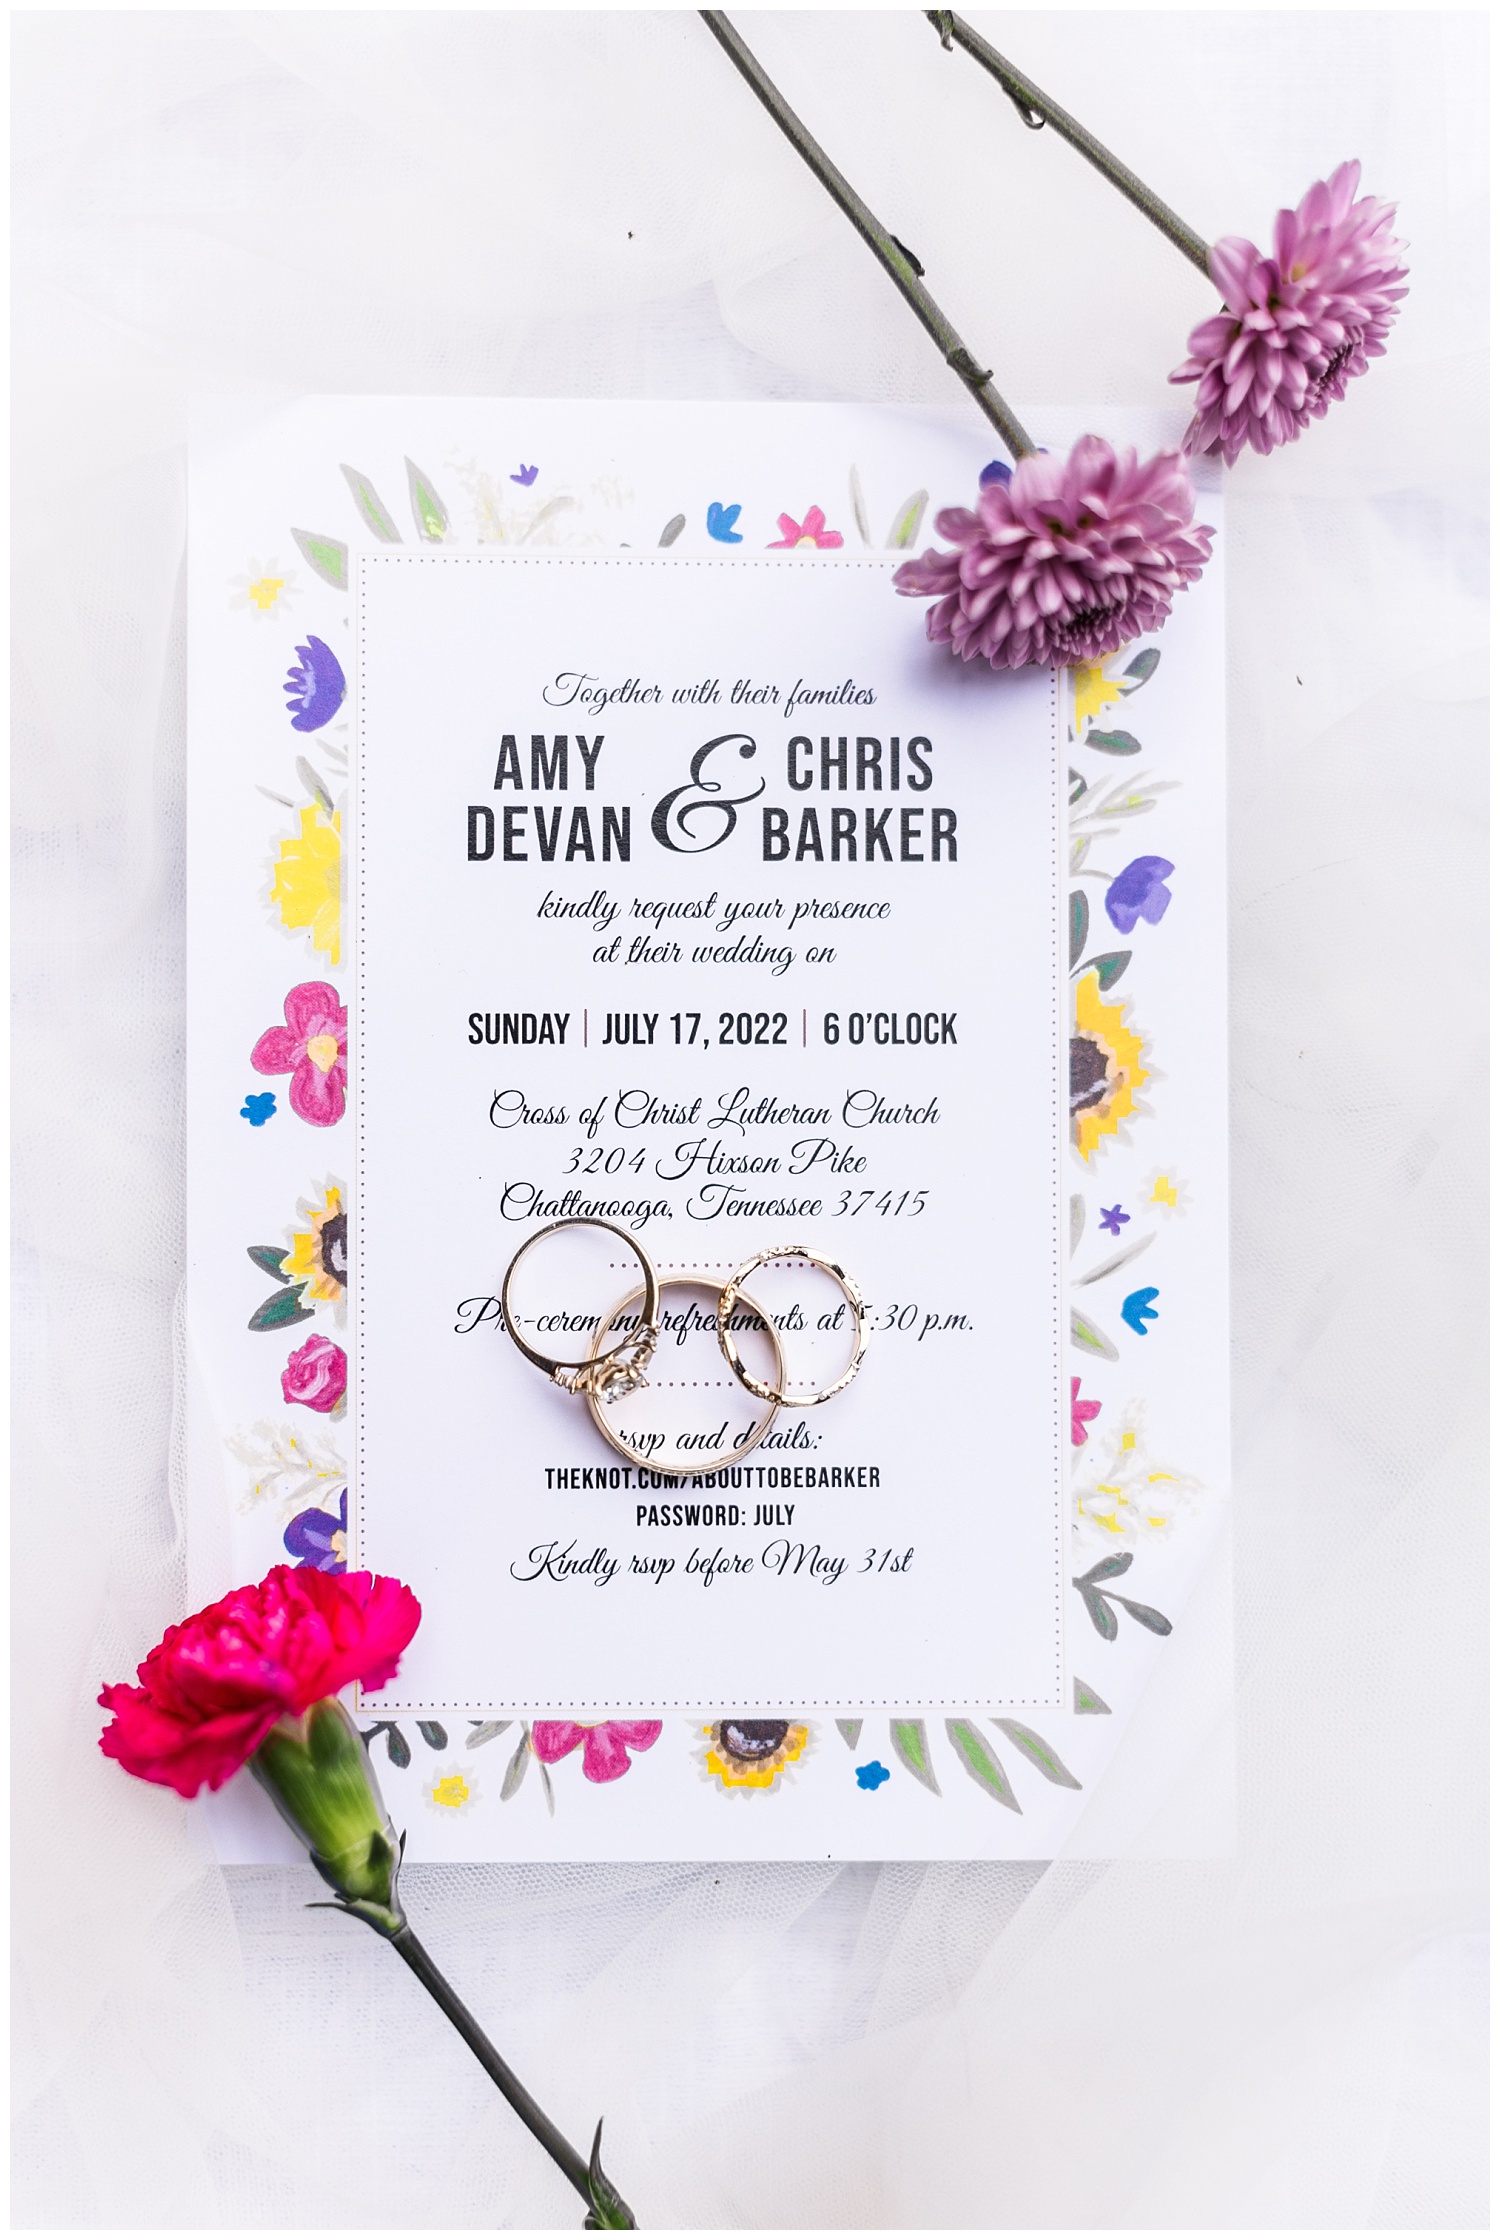 wedding rings and flowers sitting on top of invitation and 